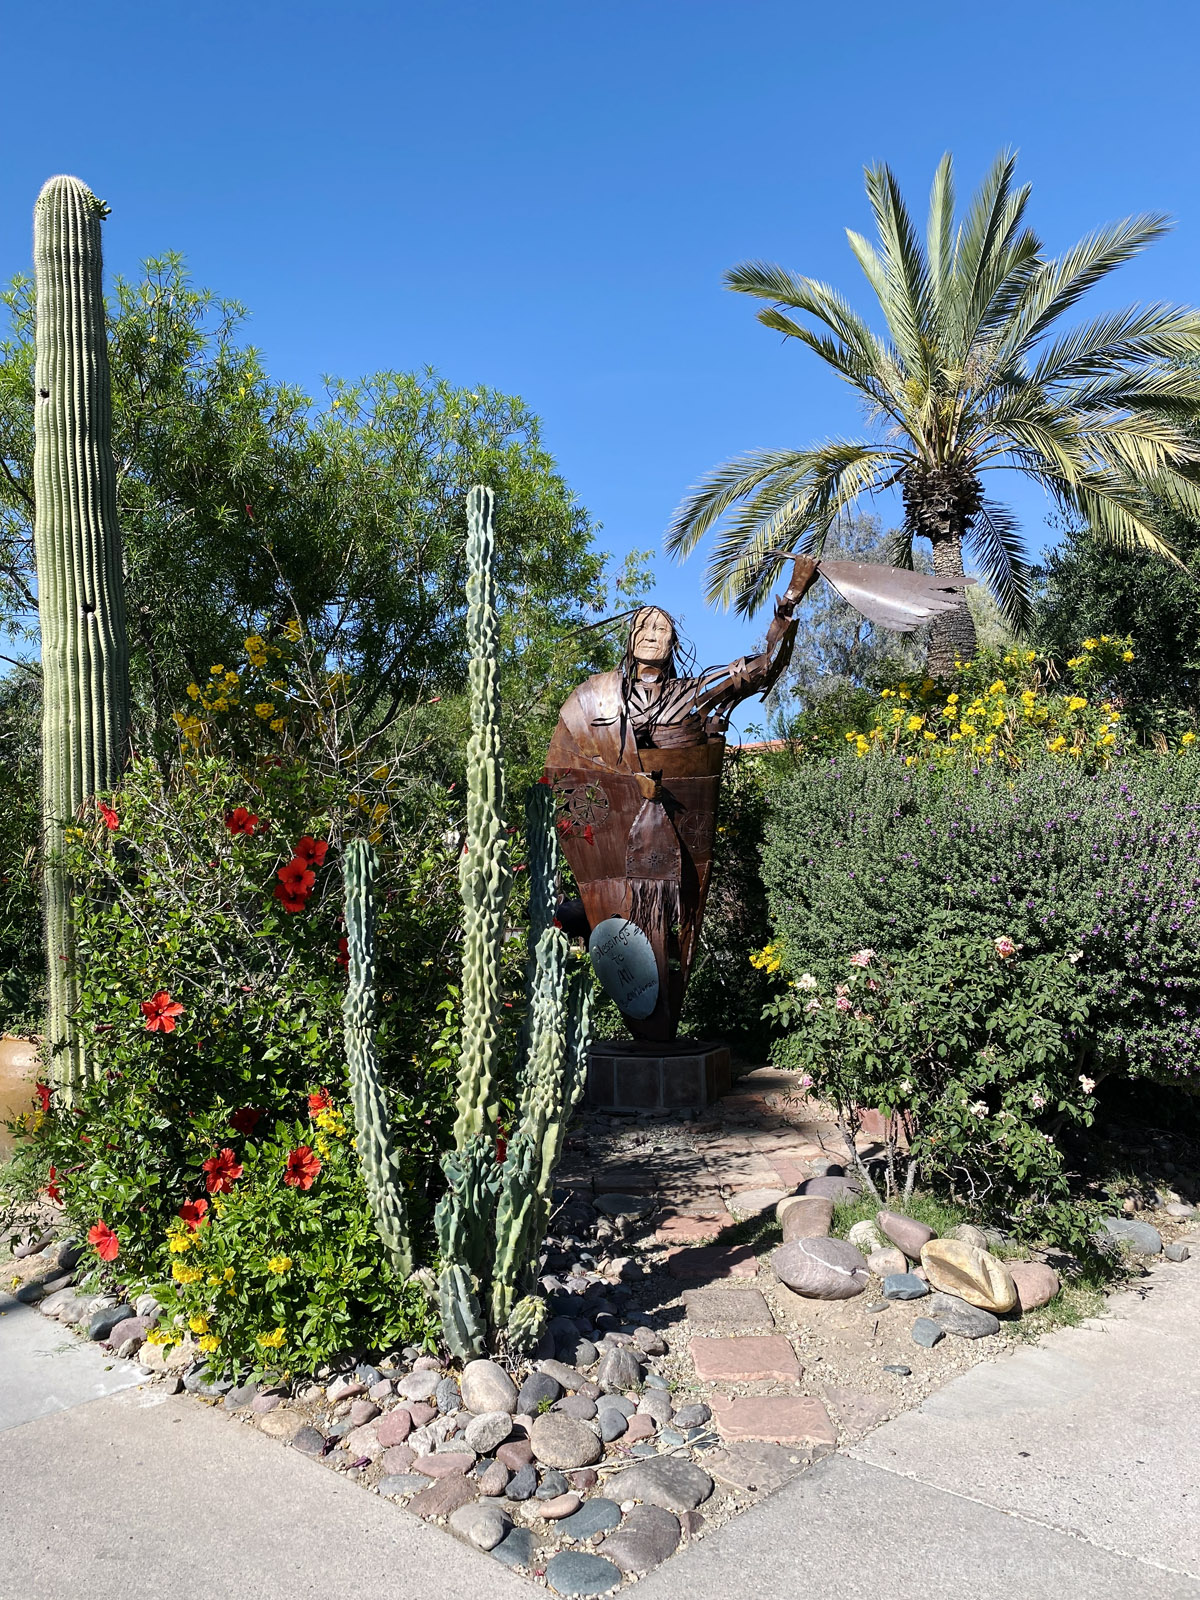 sculpture of an Indigenous person surrounded by cactus